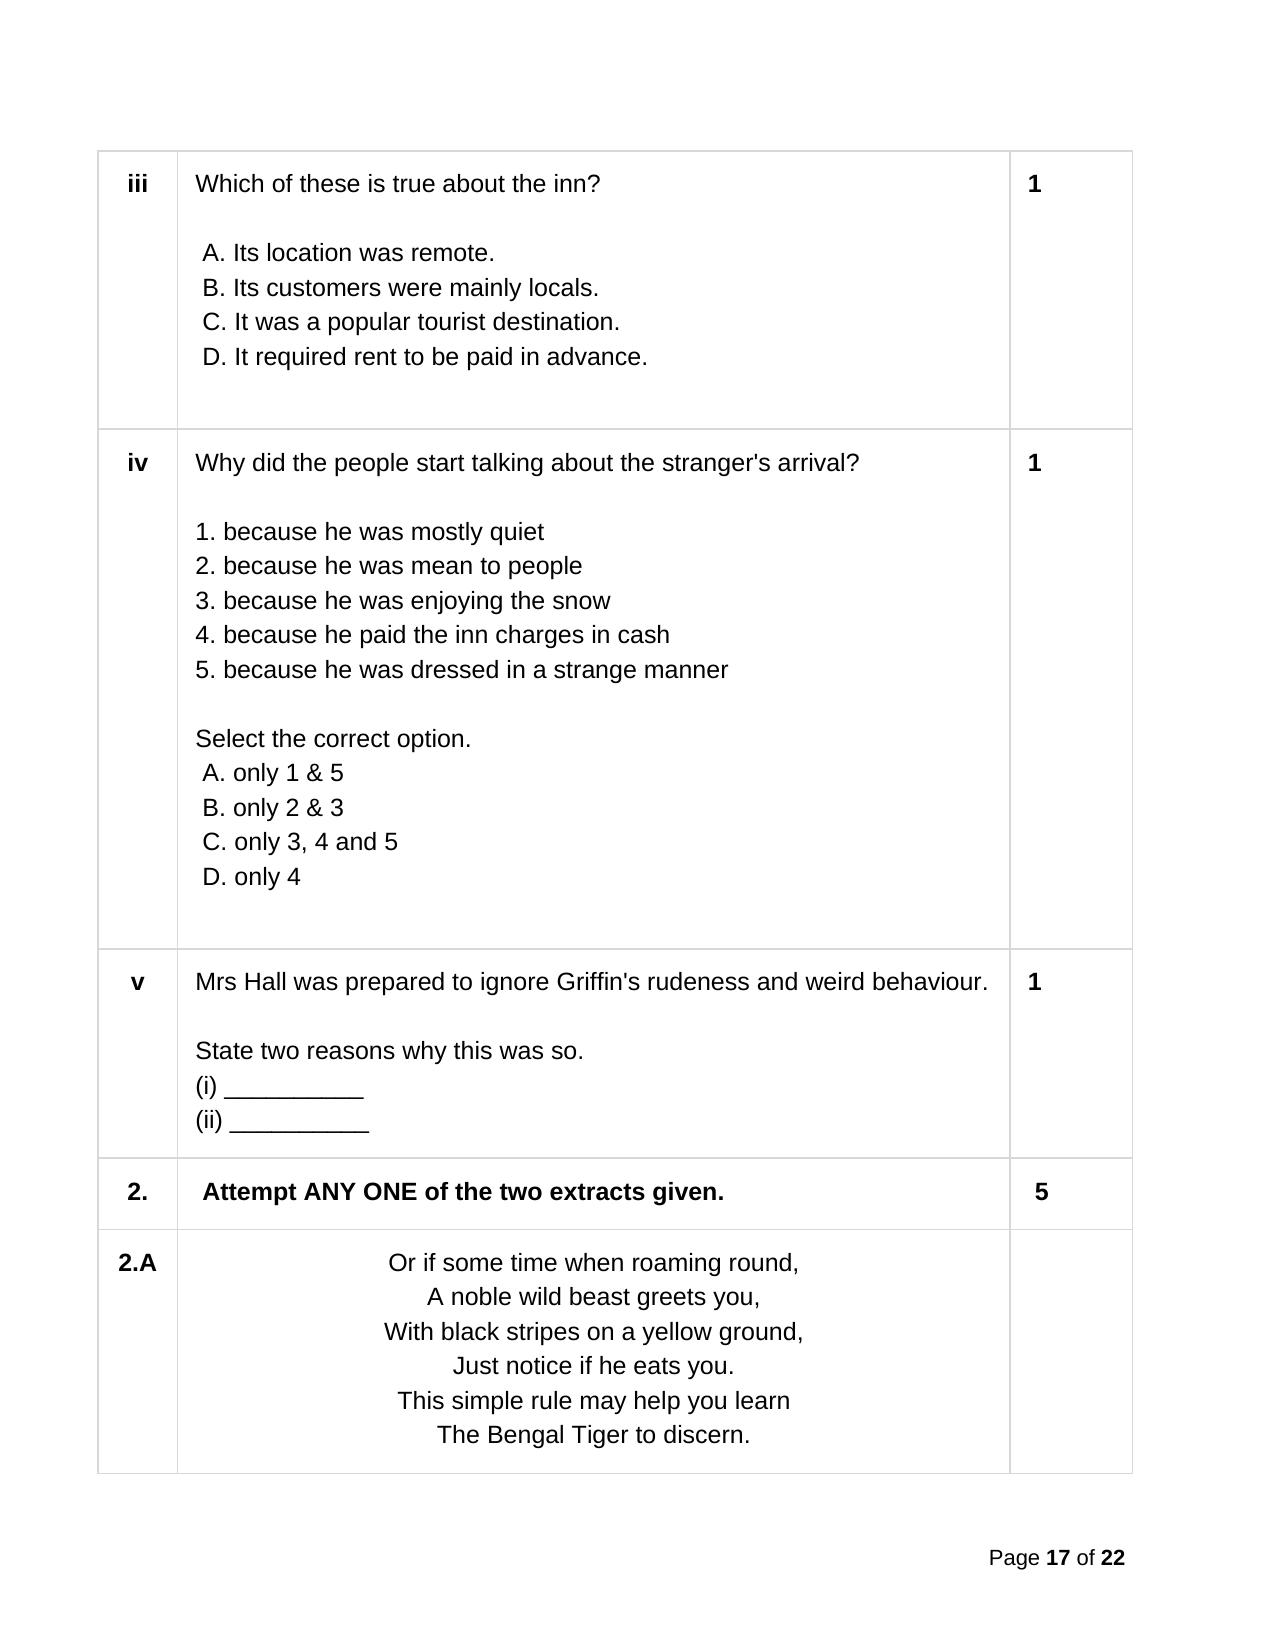 CBSE Class 10 English Practice Questions 2022-23 - Page 17